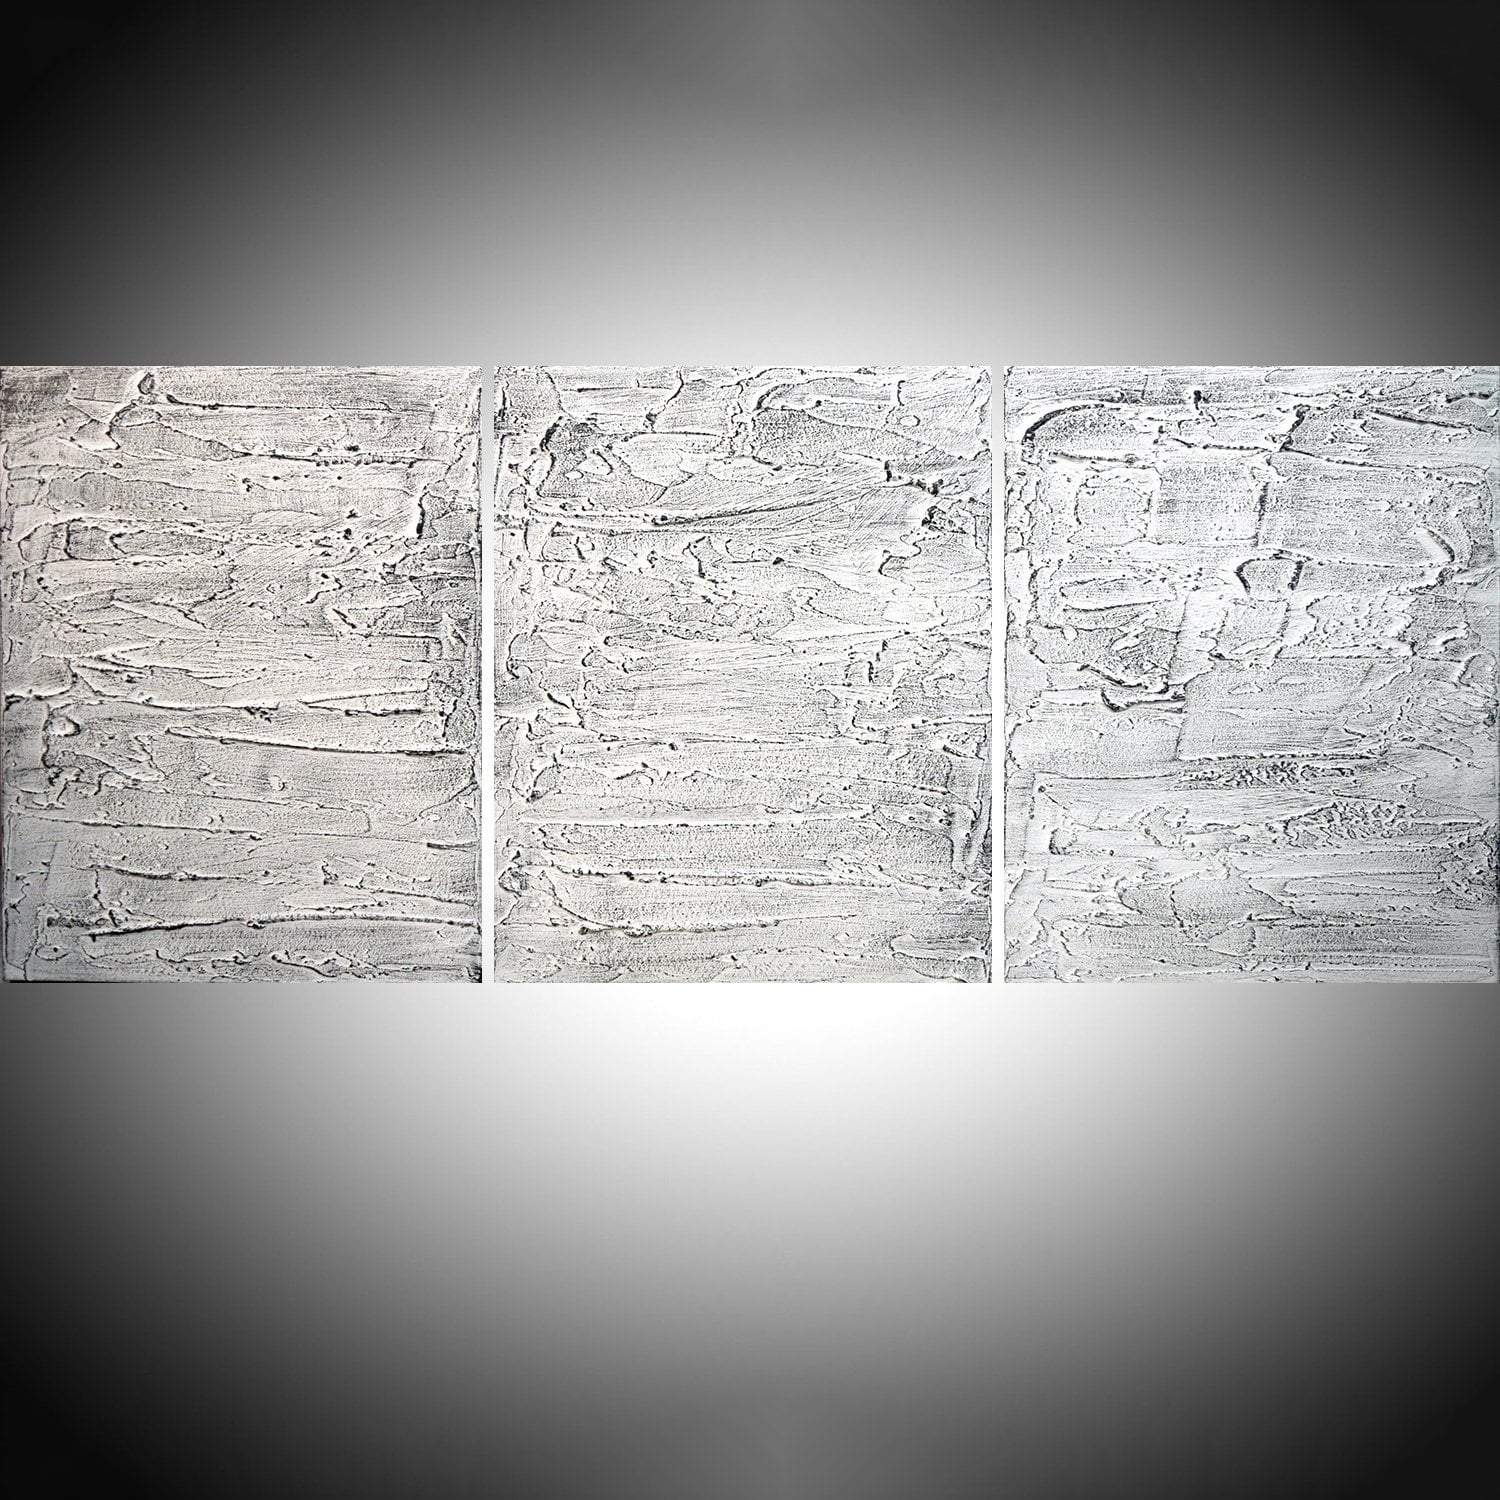 Original painting triptych extra large painting abstract canvas original artwork impasto canvas art black grey gray white Painting 20 x 48 "